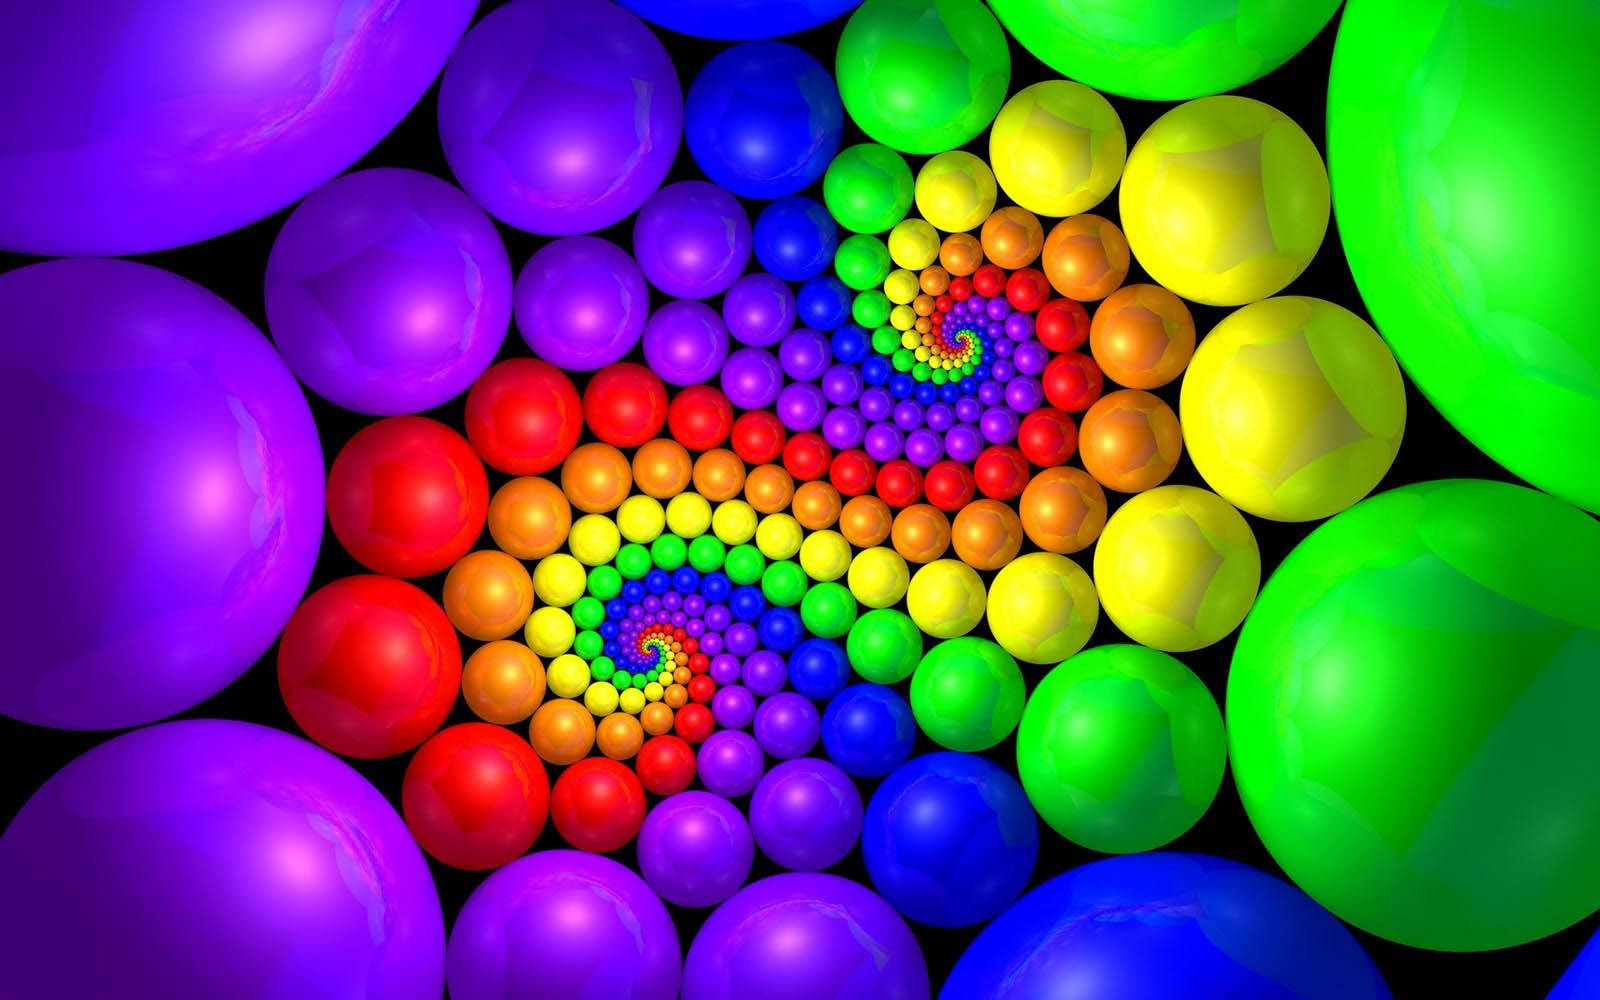 3d Colorful Balls In Swirling Design Background